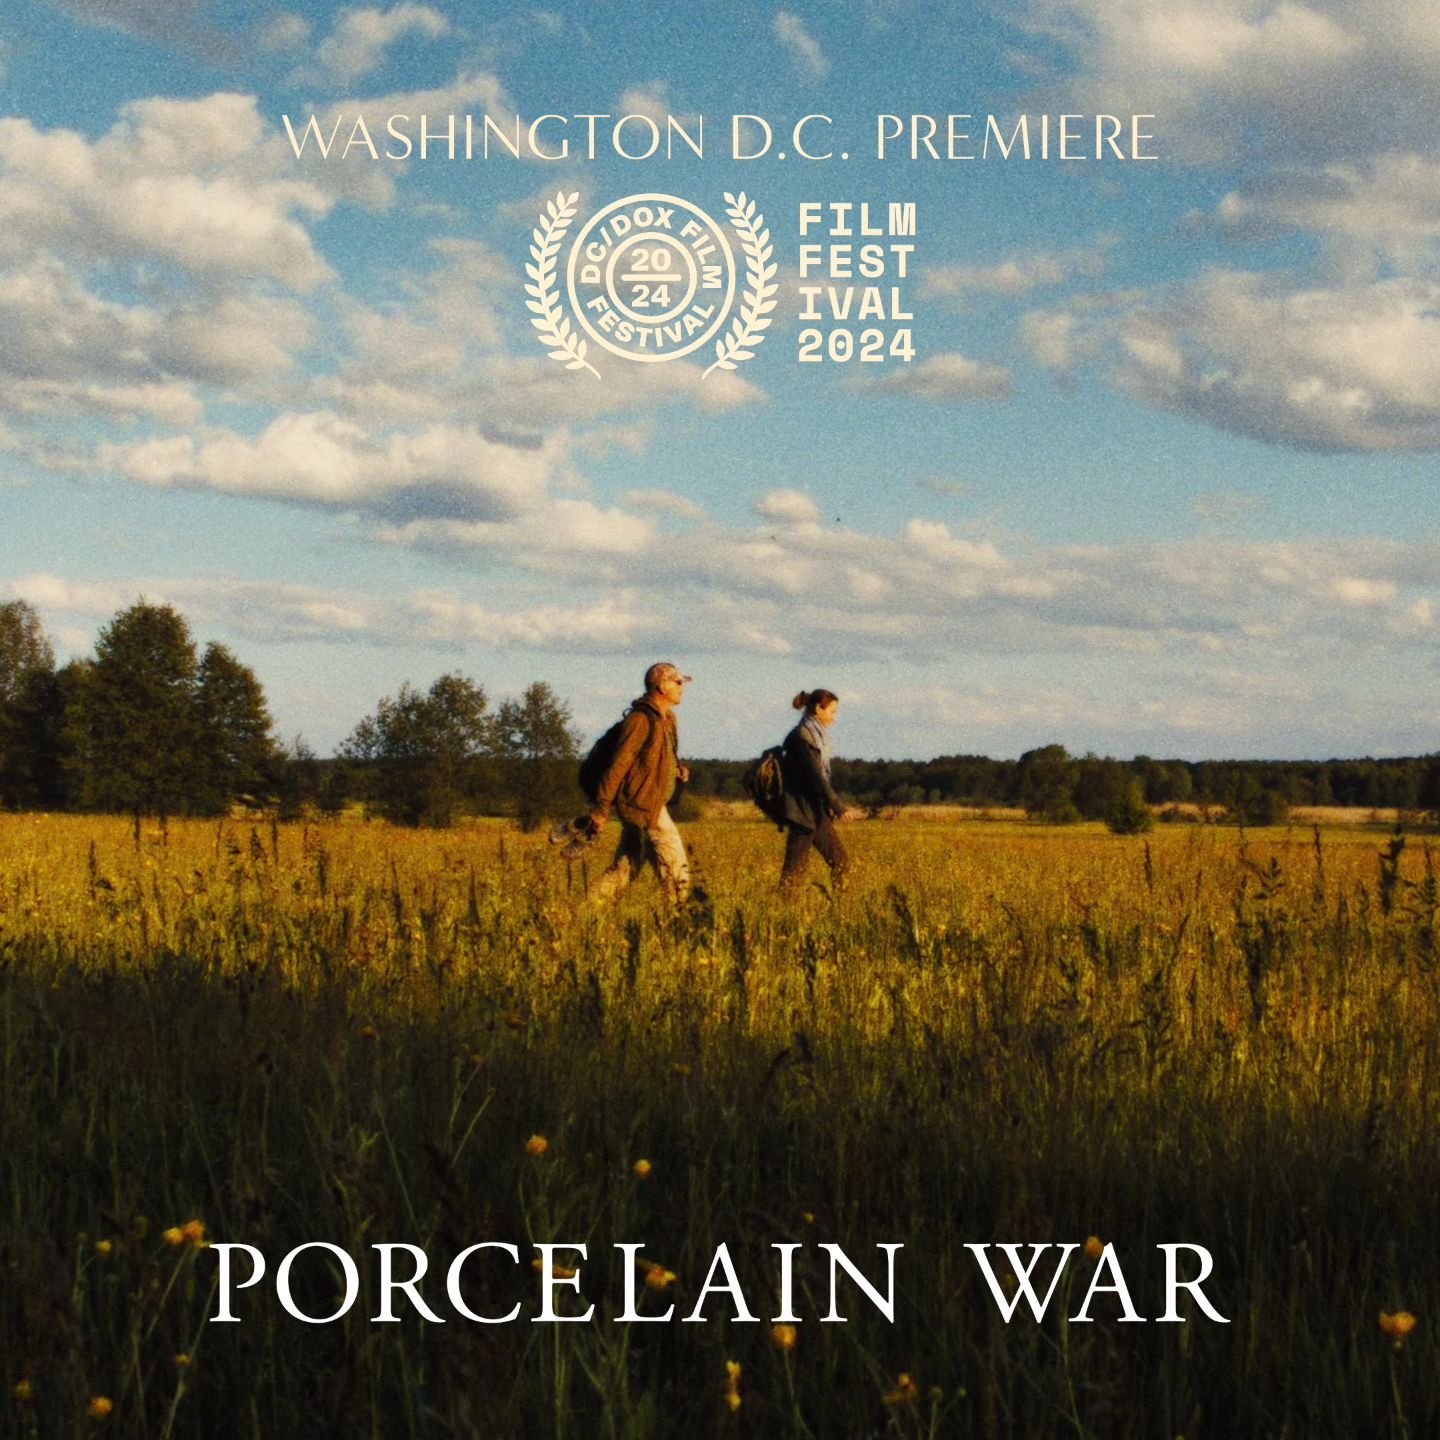 We are thrilled to announce that Porcelain War will have its Washington D.C. premiere at DC/DOX! 

This incredible festival showcases powerful and timely stories in one of the most engaging and influential places for positive change in the world - ou